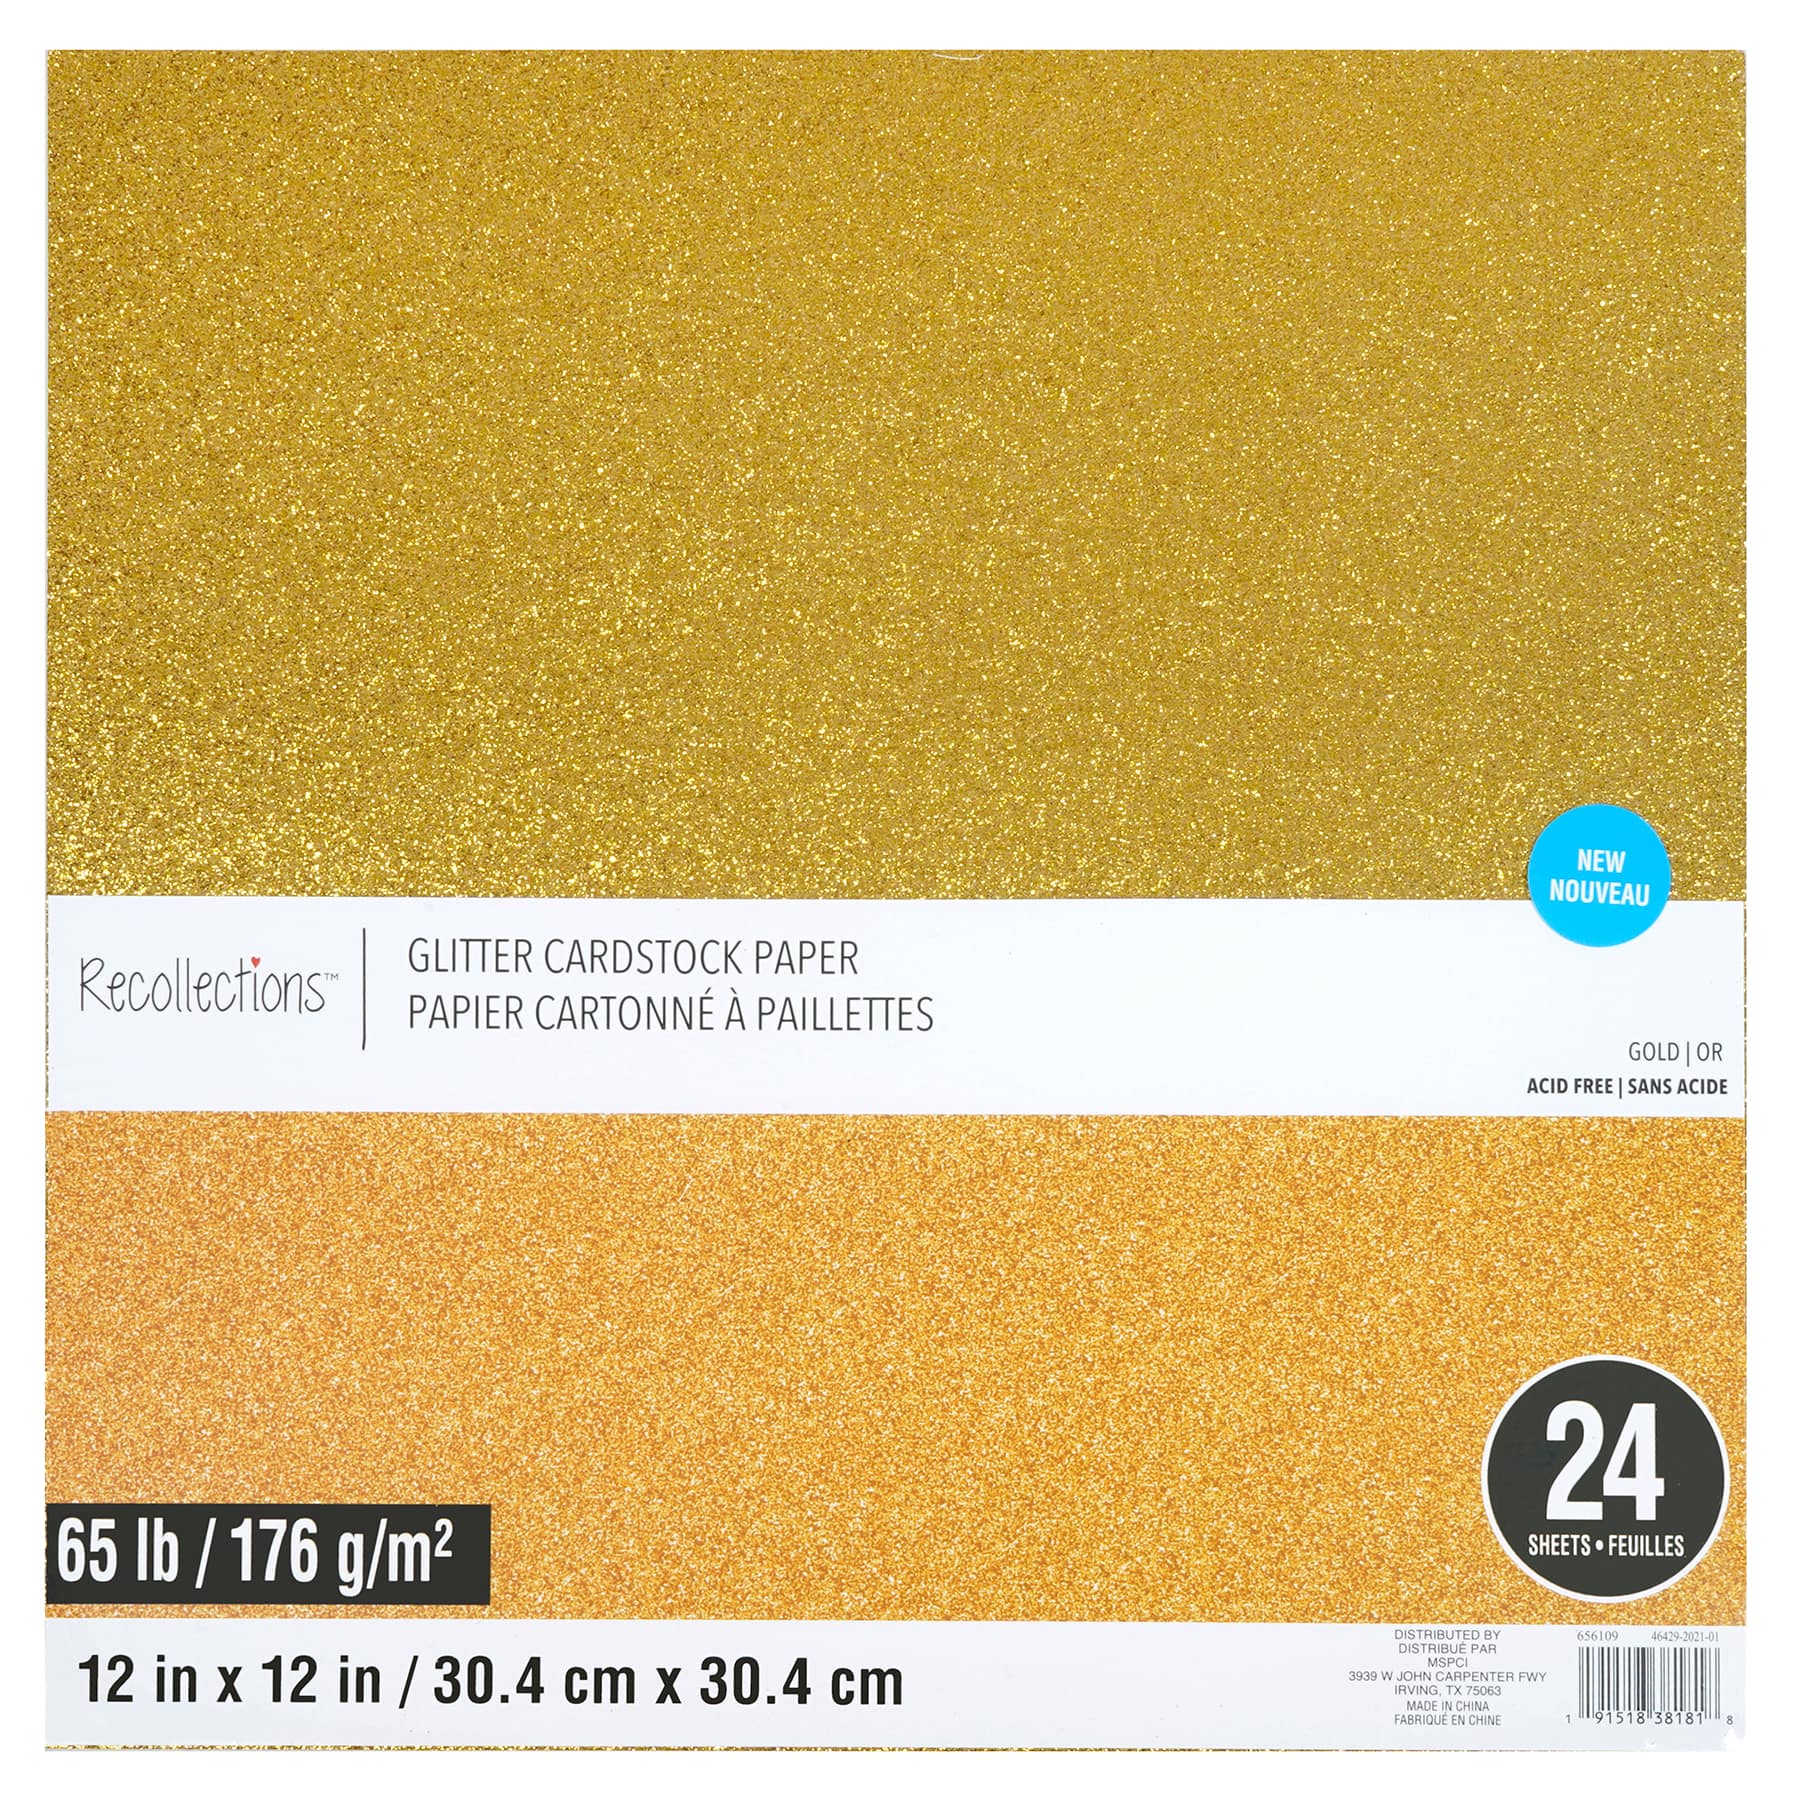 12 x 12 Cardstock - Gold Metallic (50 Qty) | Perfect for Holiday